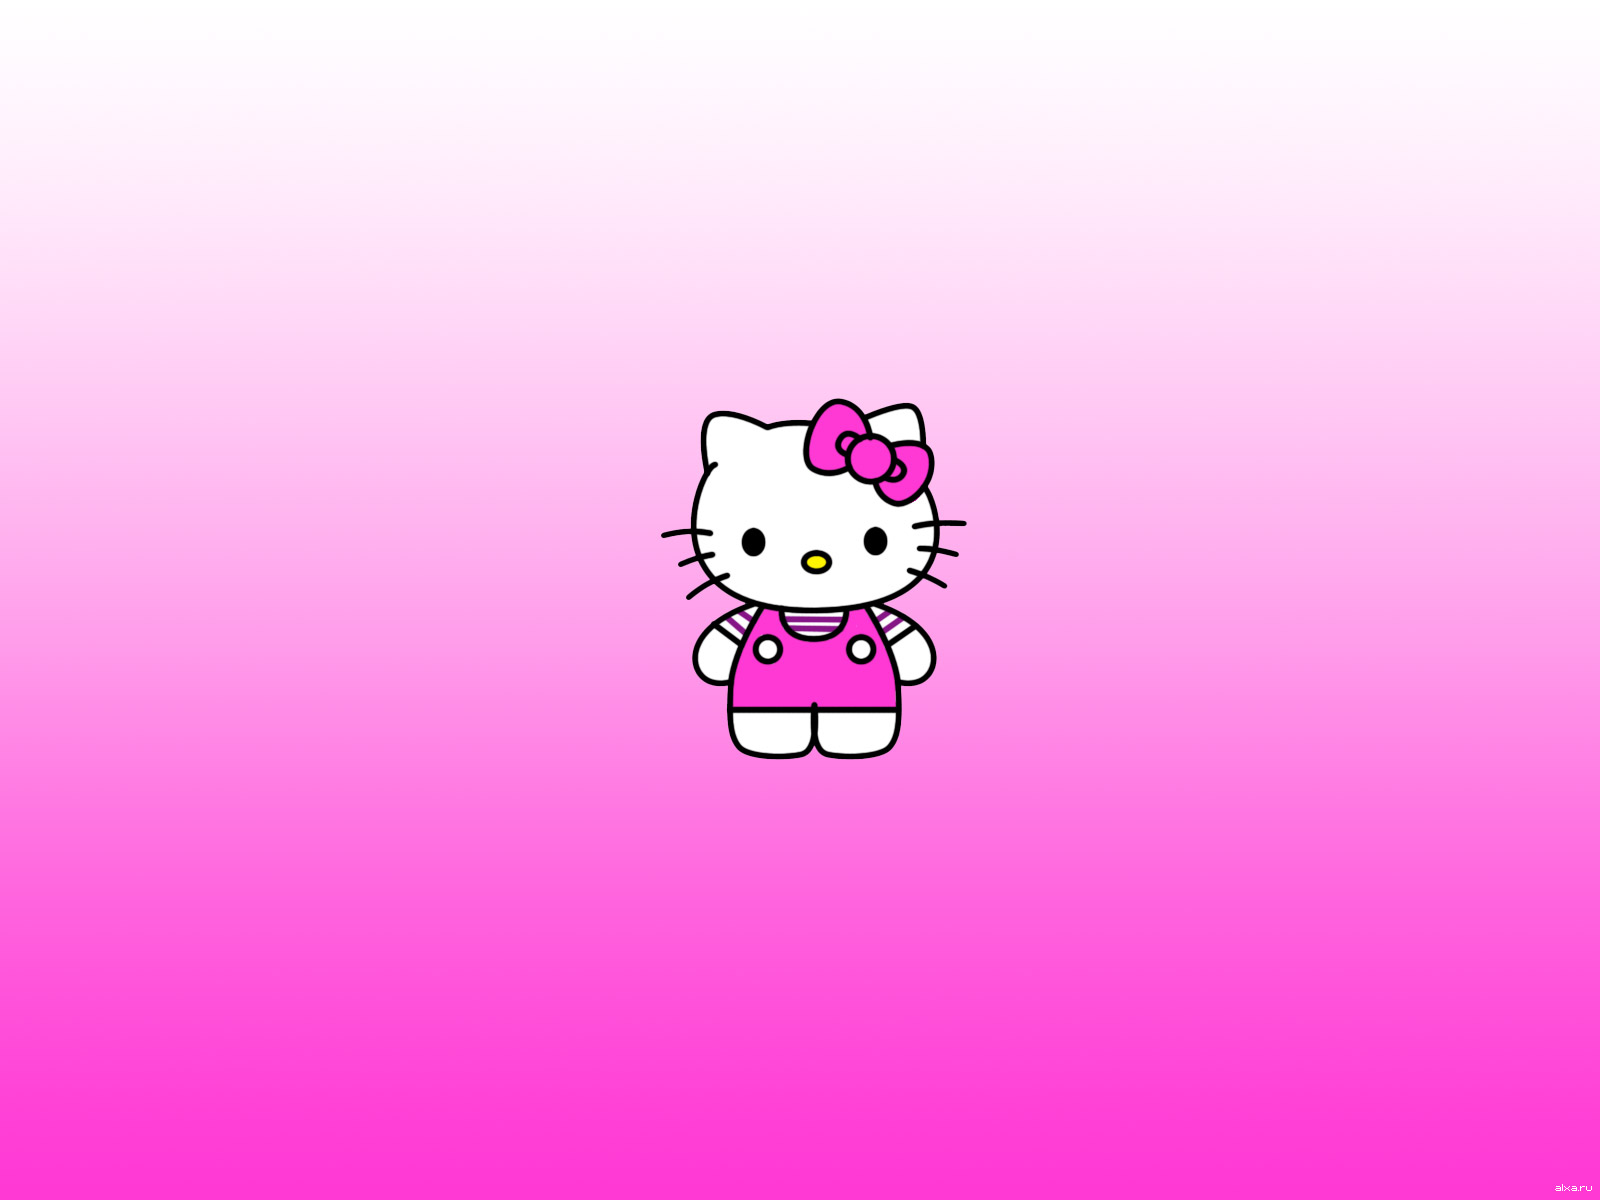 Cute Hello Kitty Backgrounds 557 Hd Wallpapers in Cartoons   Imagesci